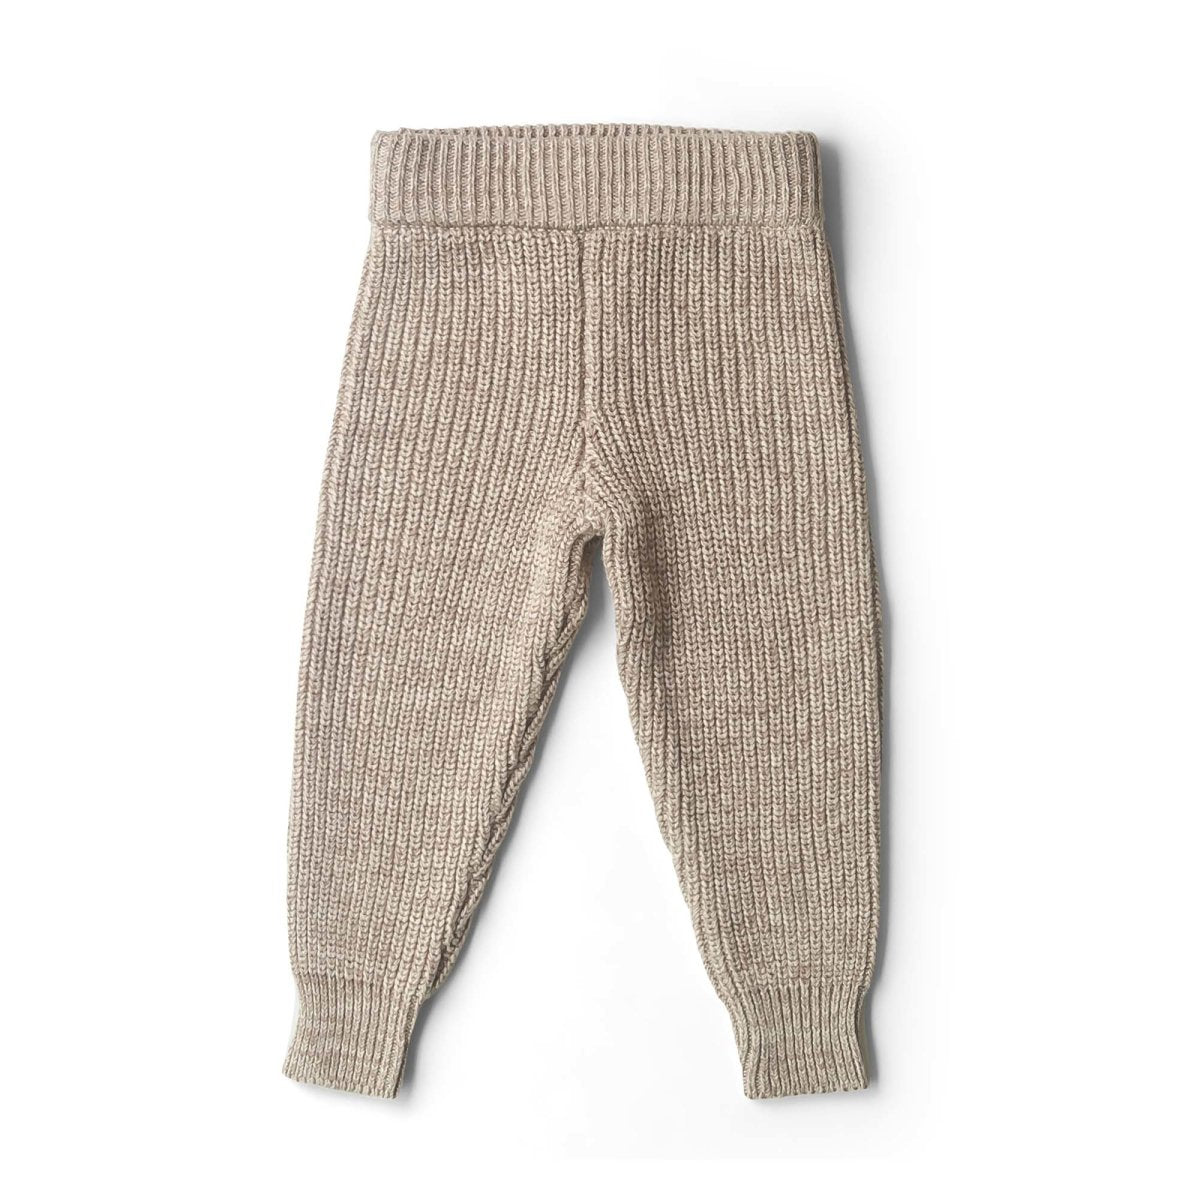 Organic Cotton Knit Pants - Pecan | goumikids | Baby Clothes - Bee Like Kids